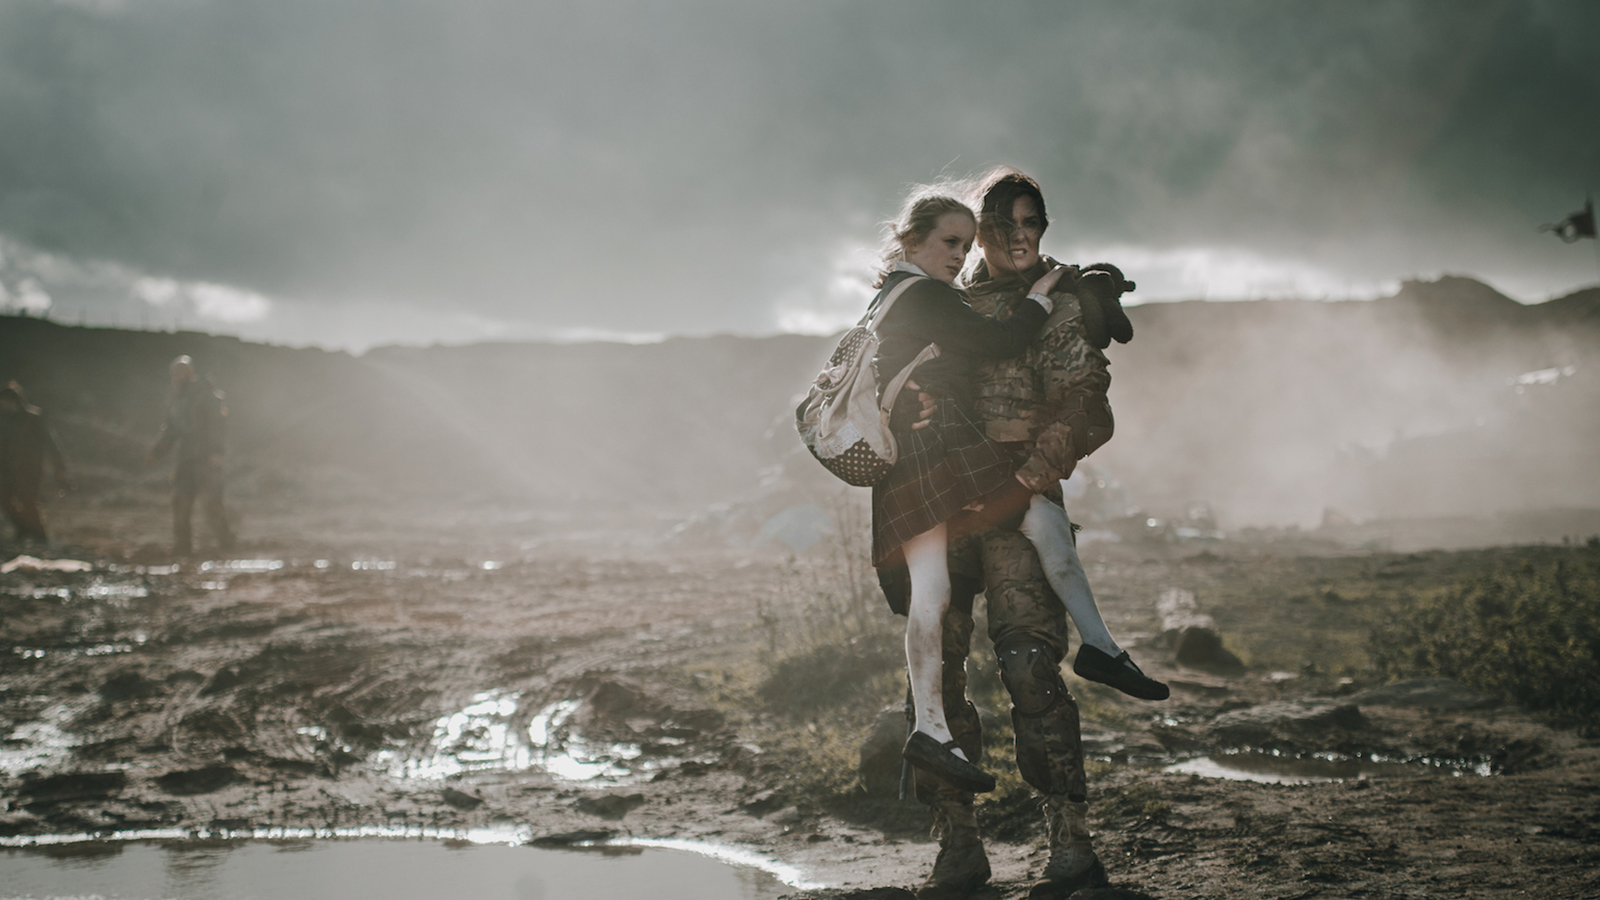 A soldier holds a young girl, looking out onto battle